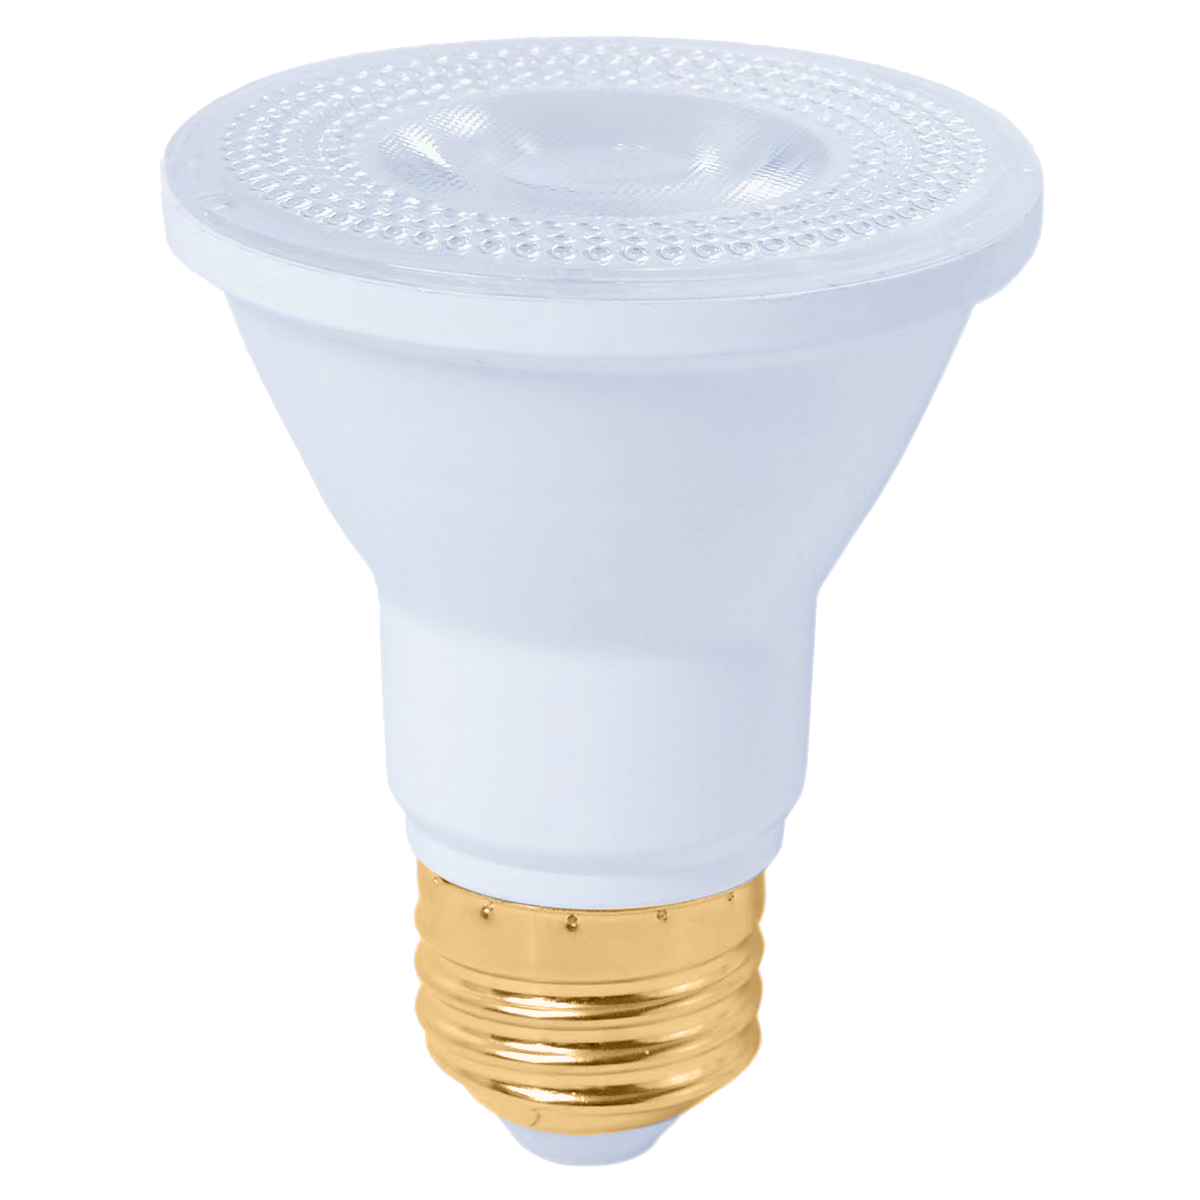 GoodBulb PAR20 LED light bulb with warm, comfortable spectrum of light. Can last 25,000 Hours and is dimmable.